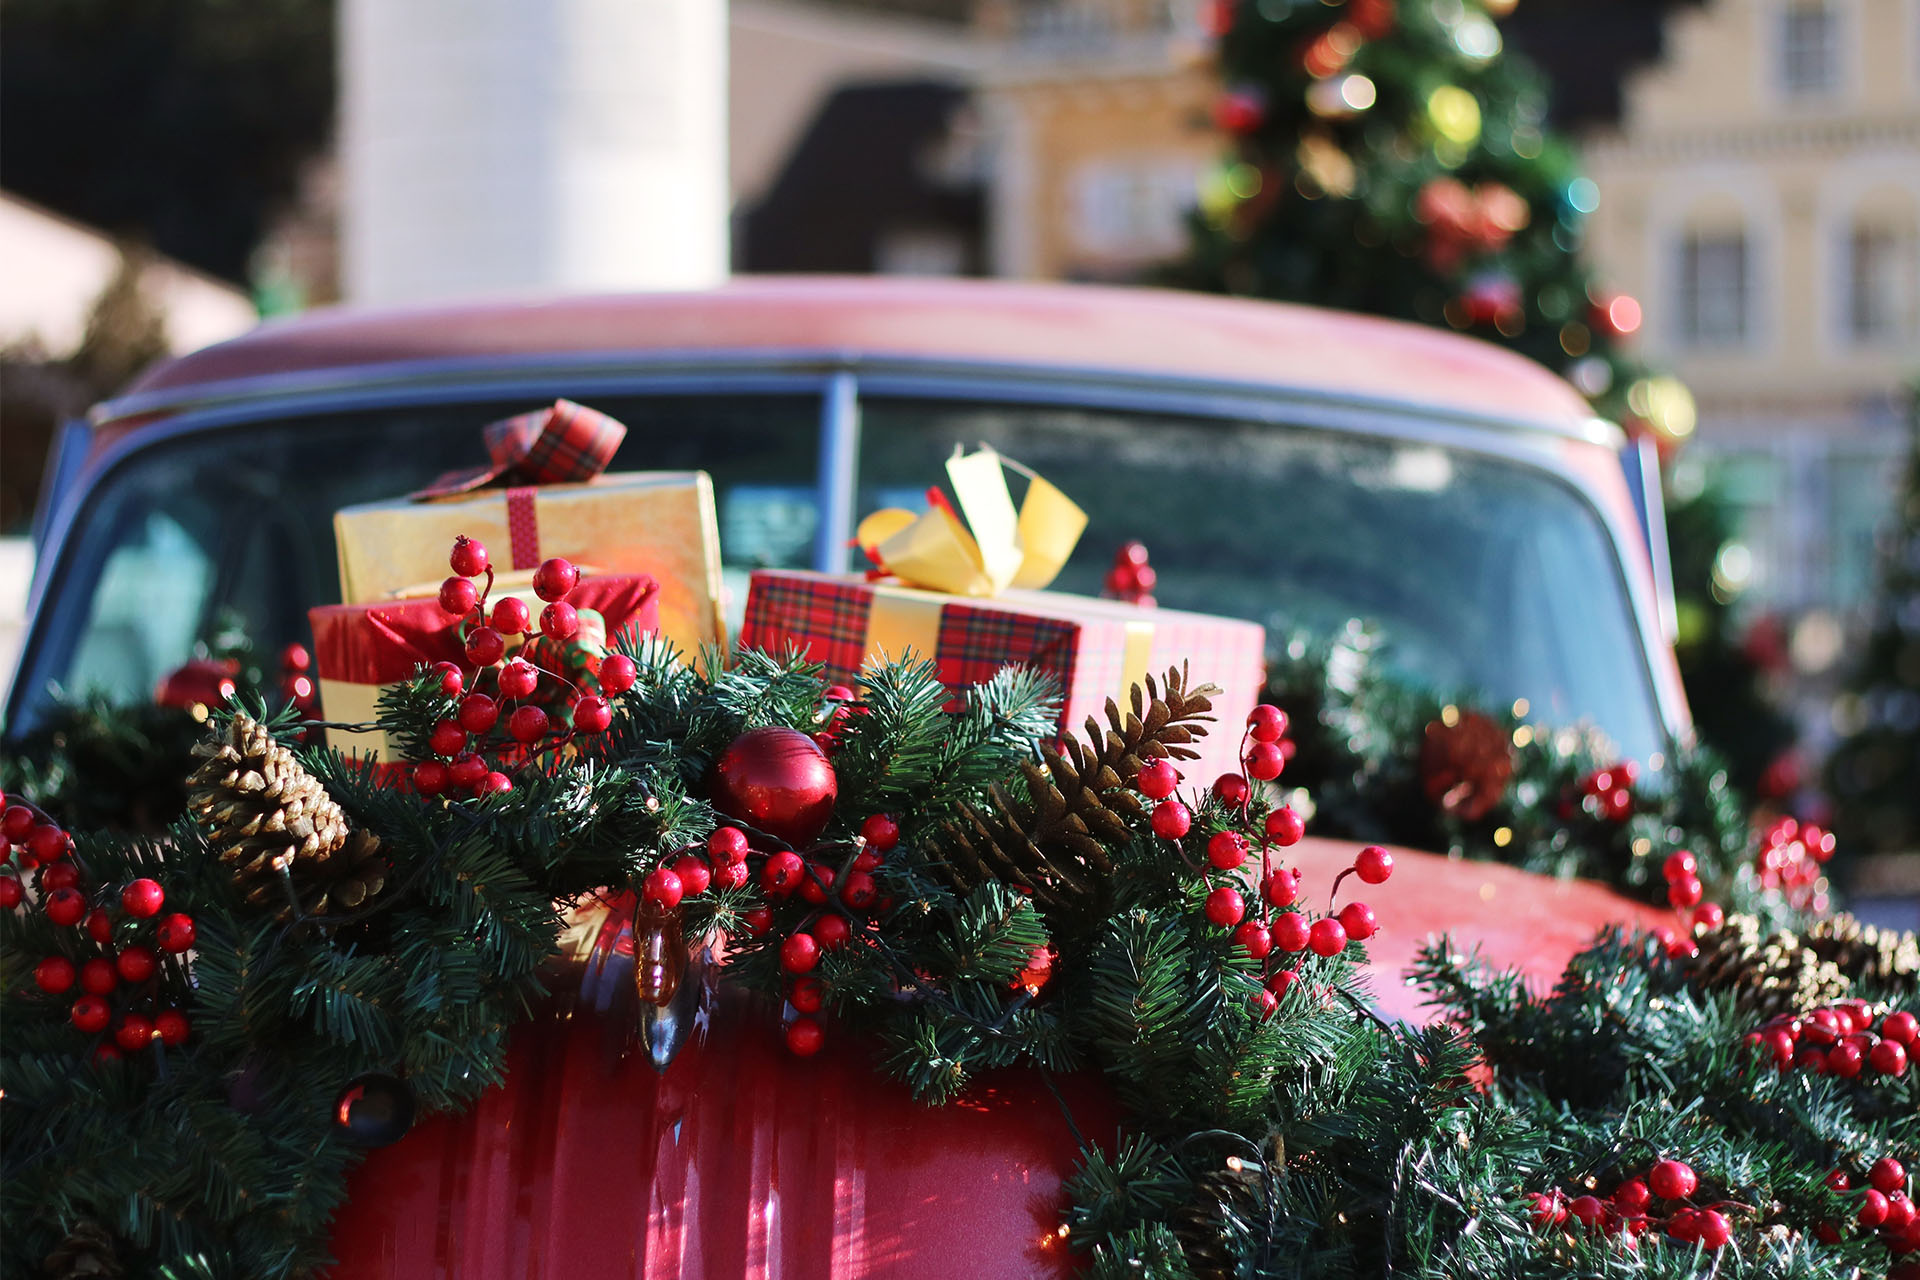 A red car with green holiday garland and wrapped gifts on its hood.